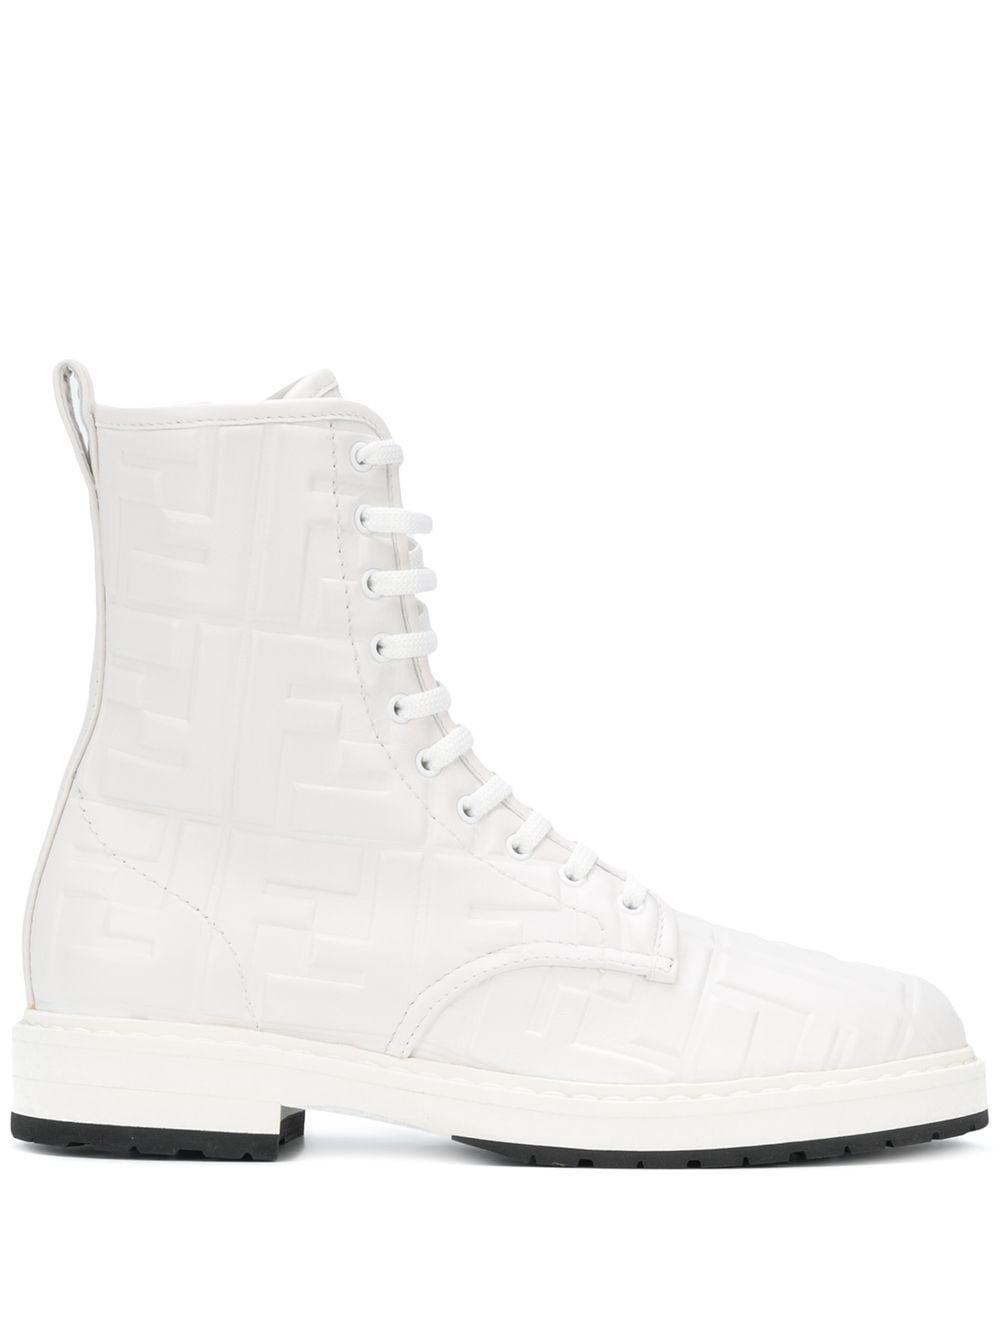 Fendi Leather Ff Embossed Combat Boots in White - Lyst